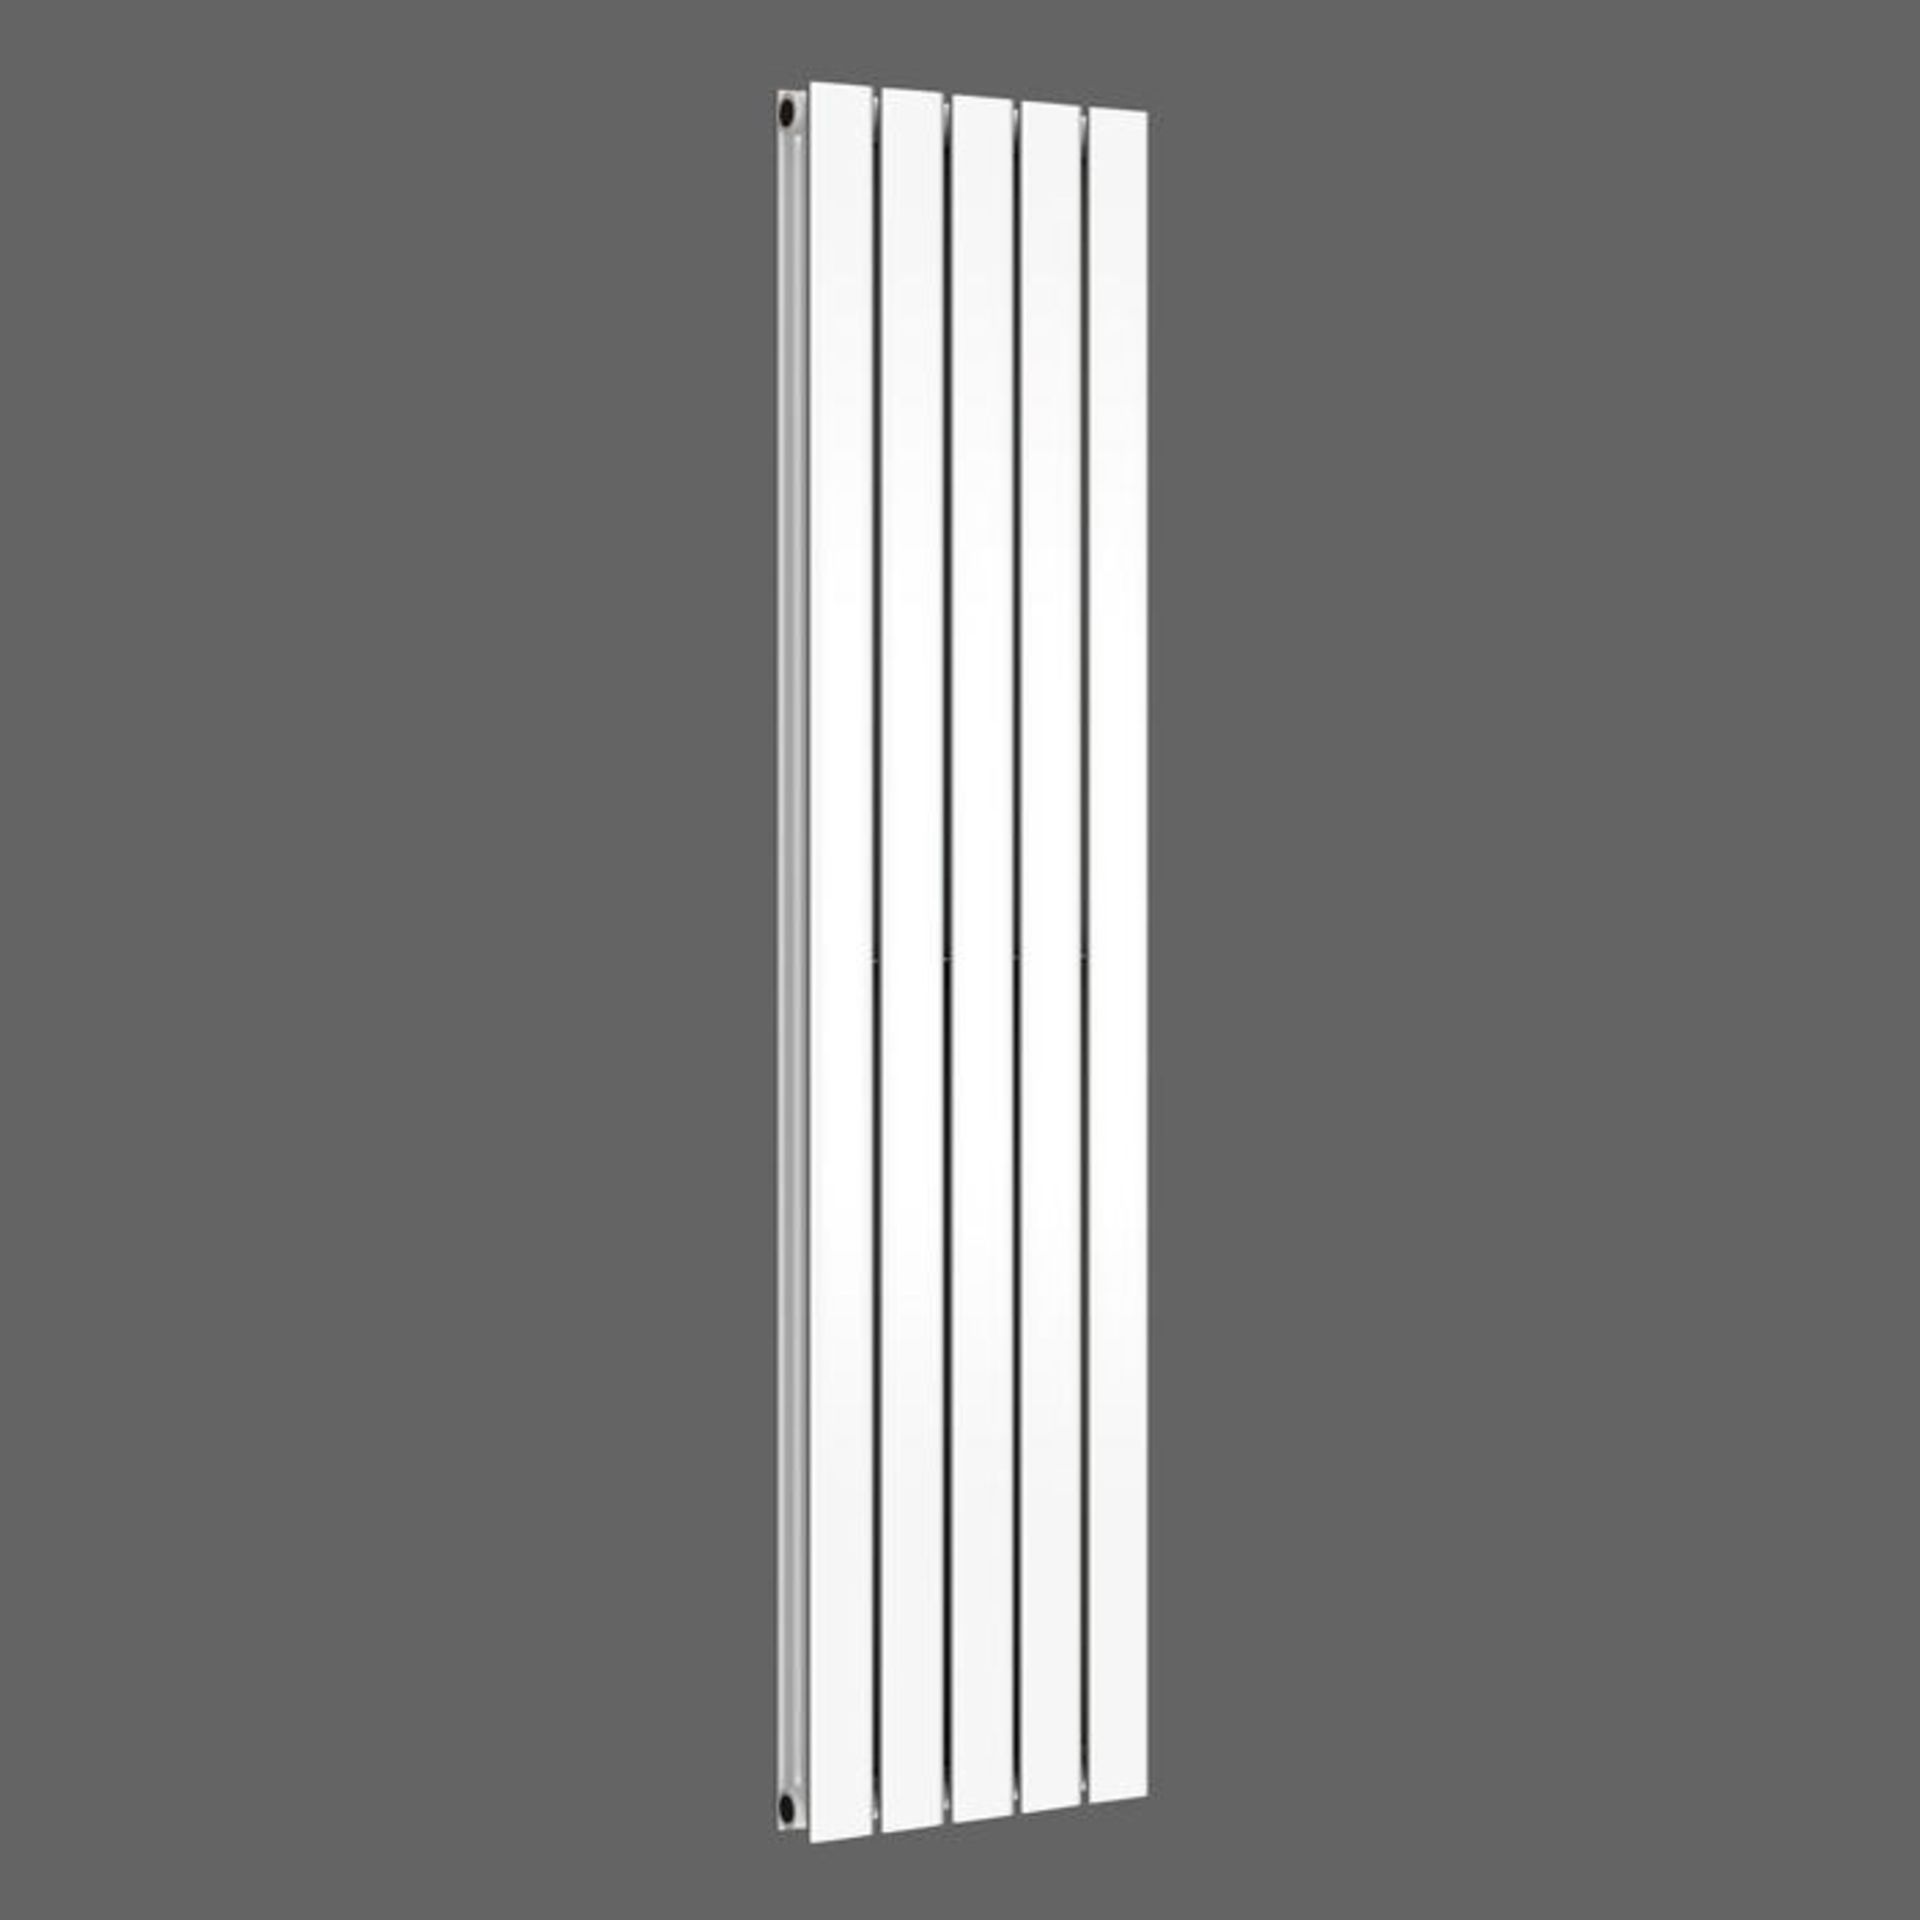 1600X360mm Gloss White Double Flat Panel Vertical Radiator. Ara6/1600Dw. Rrp £382.99.We Love T... - Image 2 of 2